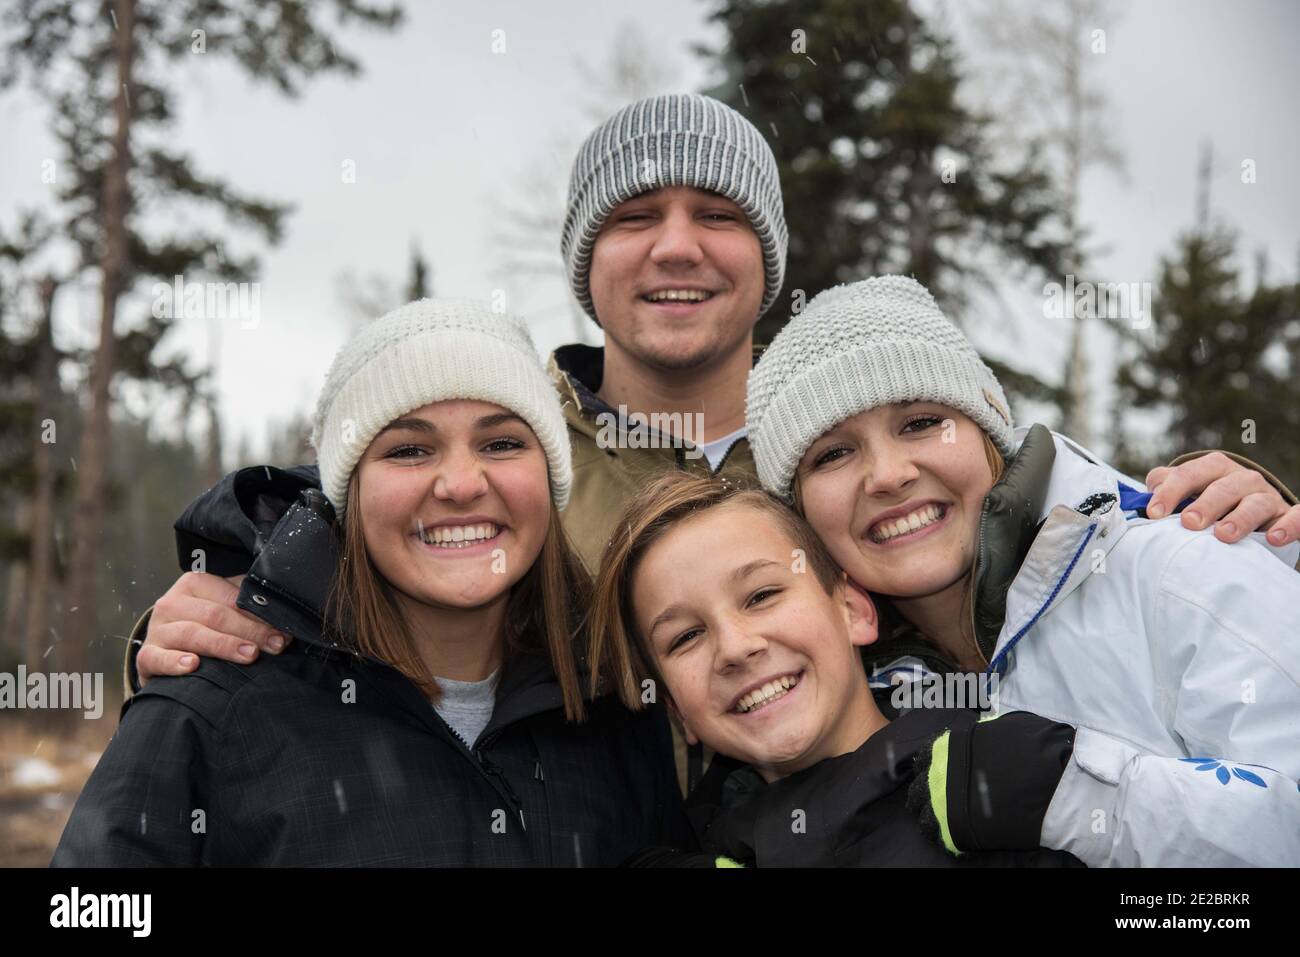 Family posing together on a winter outing. Stock Photo